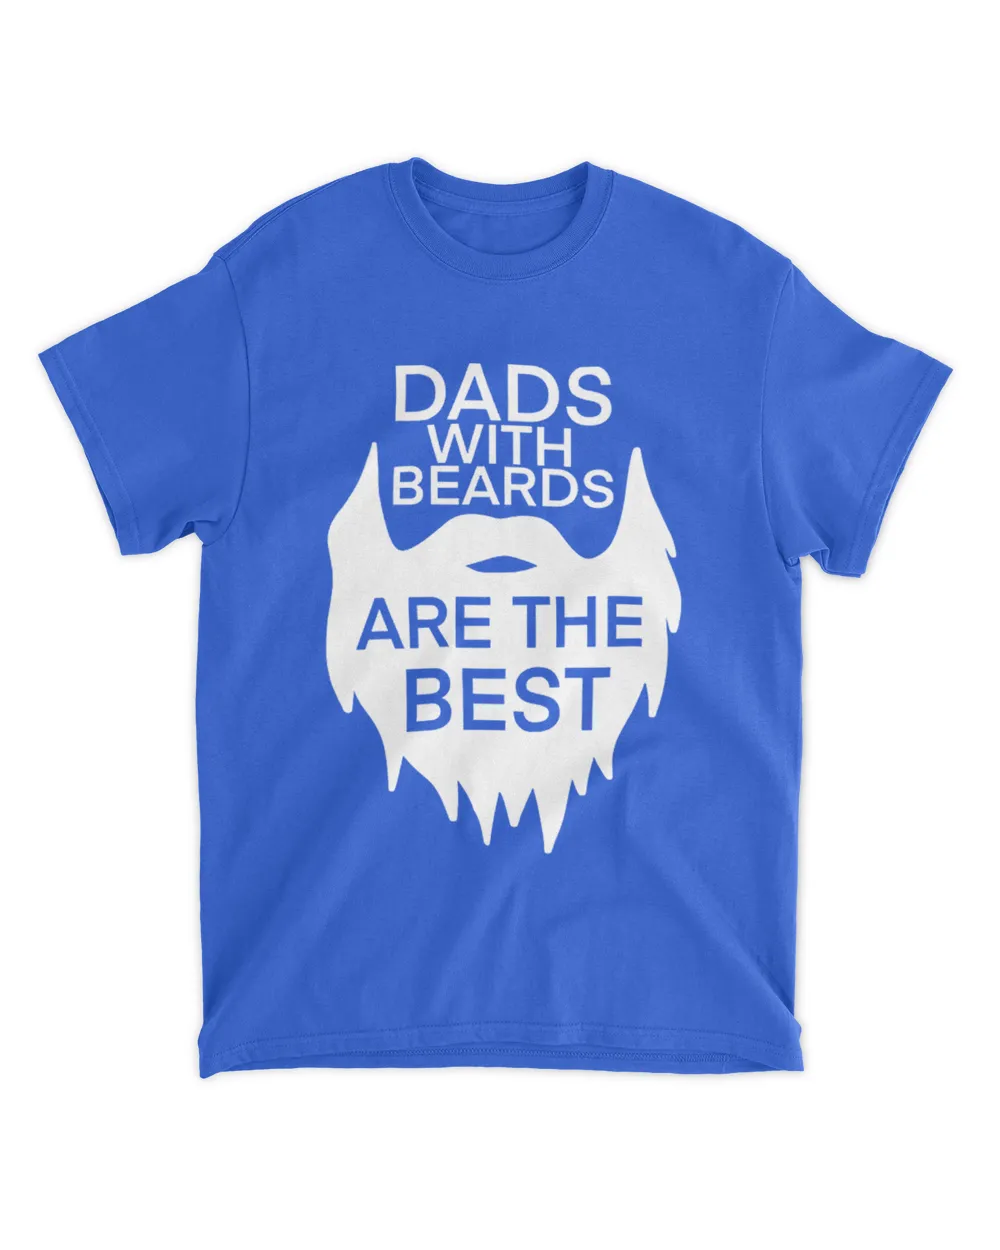 Dad with the beards are the best shirt, Funny Shirt For Dads, Cool Dad Shirt, Funny Fathers Day Gift, Dad Gift Ideas,Best Dad Ever Shirt.